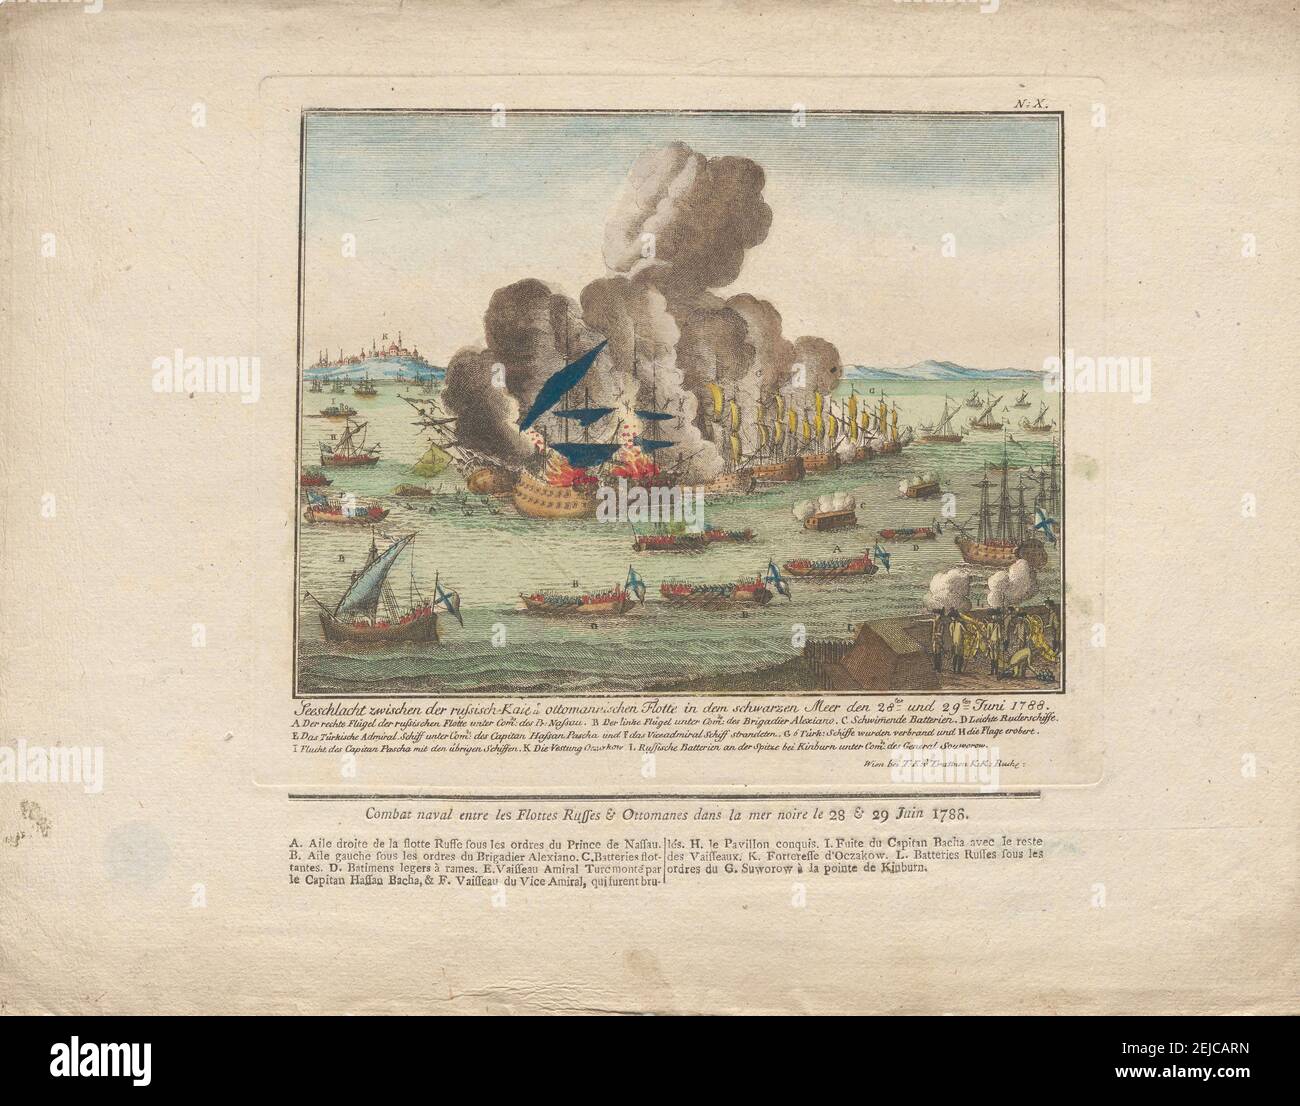 Naval battle between the Russian and Ottoman fleet in the Black Sea on June 28 and 29, 1788. Museum: PRIVATE COLLECTION. Author: ANONYMOUS. Stock Photo